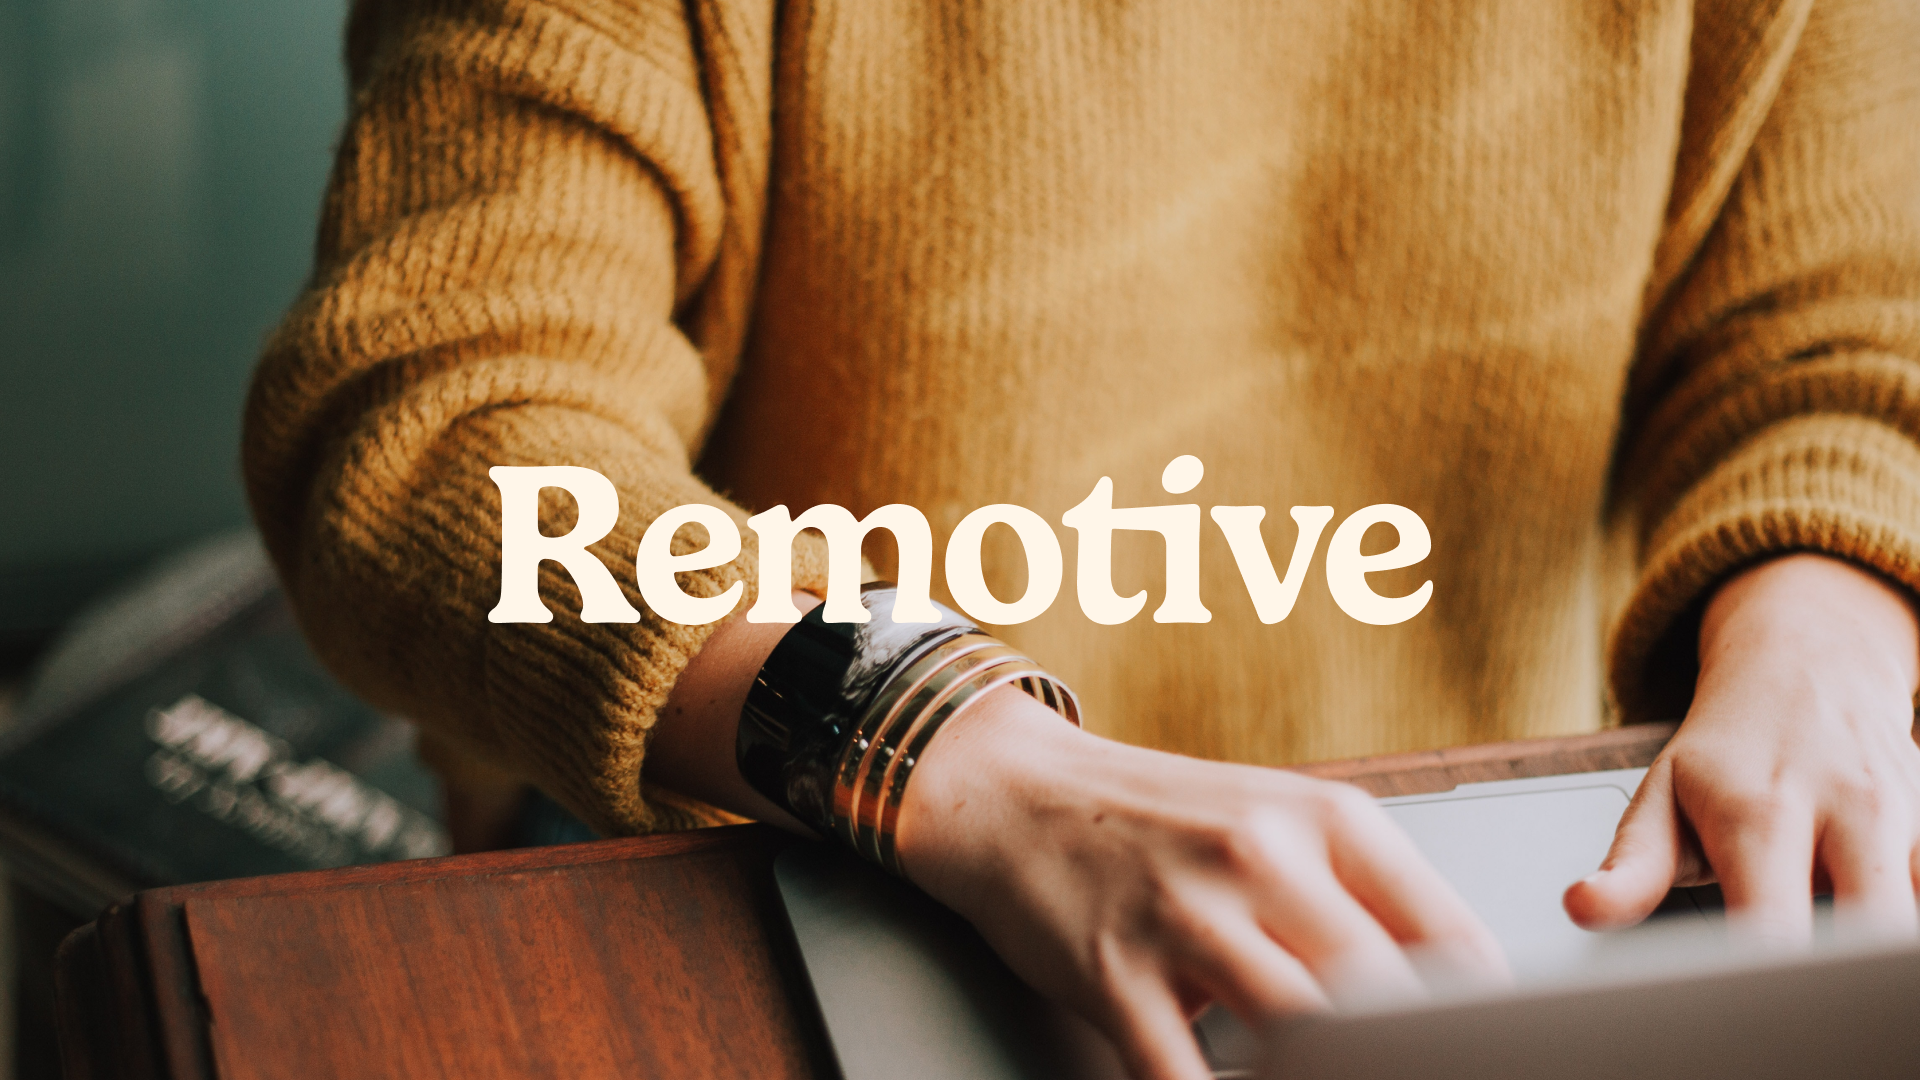 Remotive's New Look